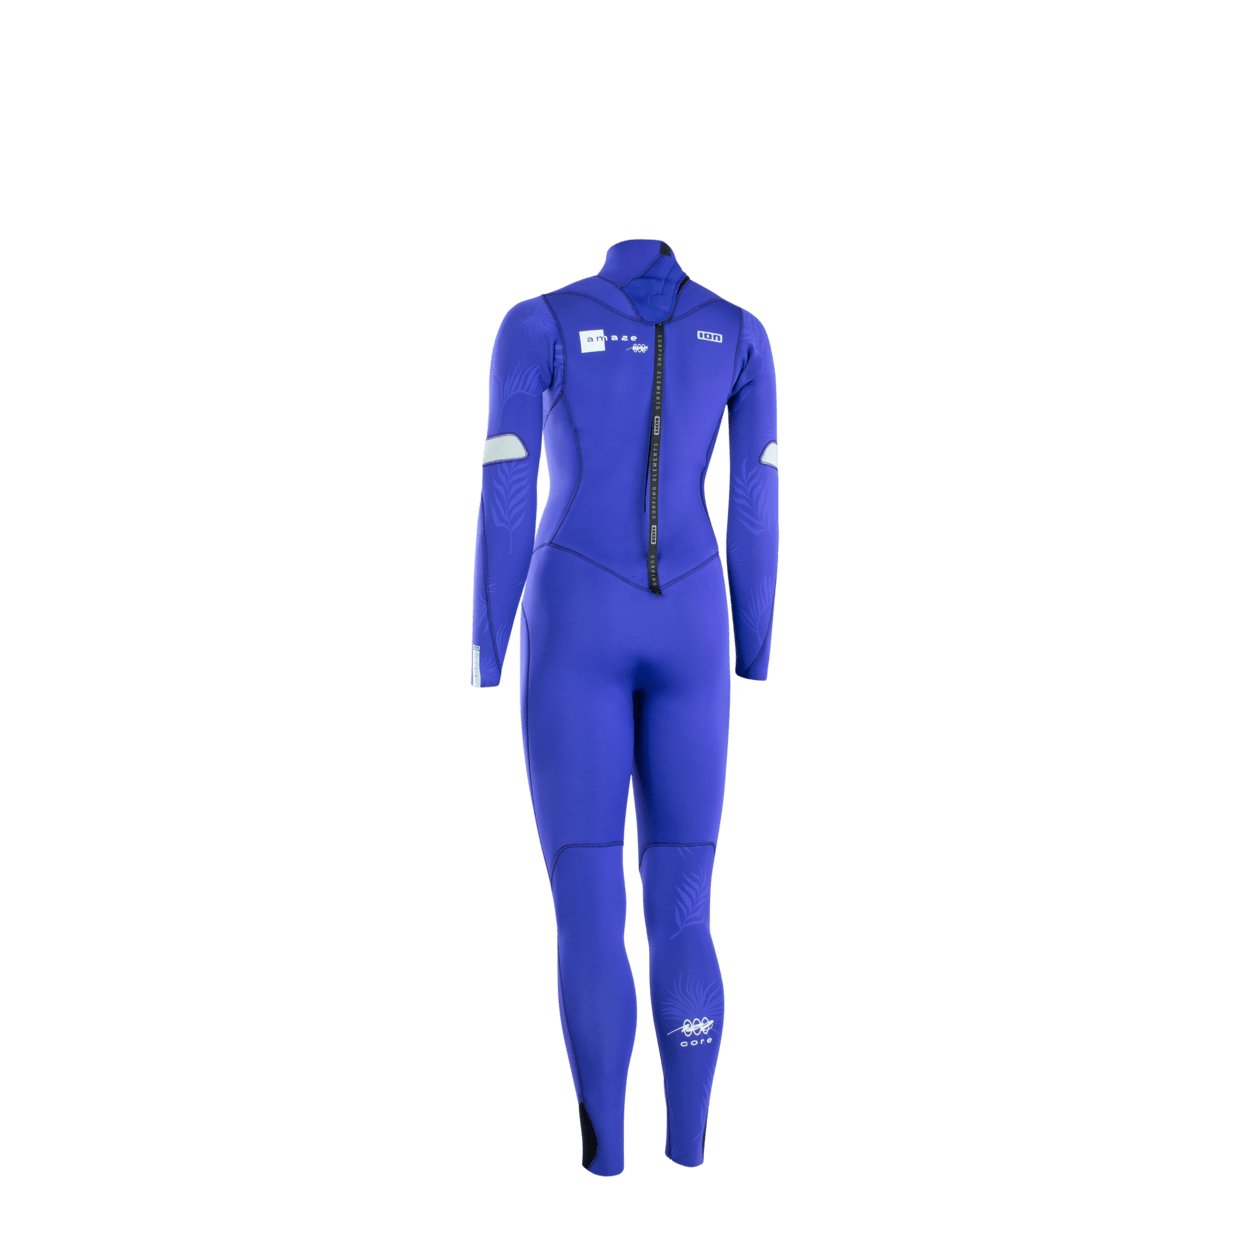 ION Amaze Core 5/4 Back Zip 2022 - Worthing Watersports - 9010583057613 - Wetsuits - ION Water